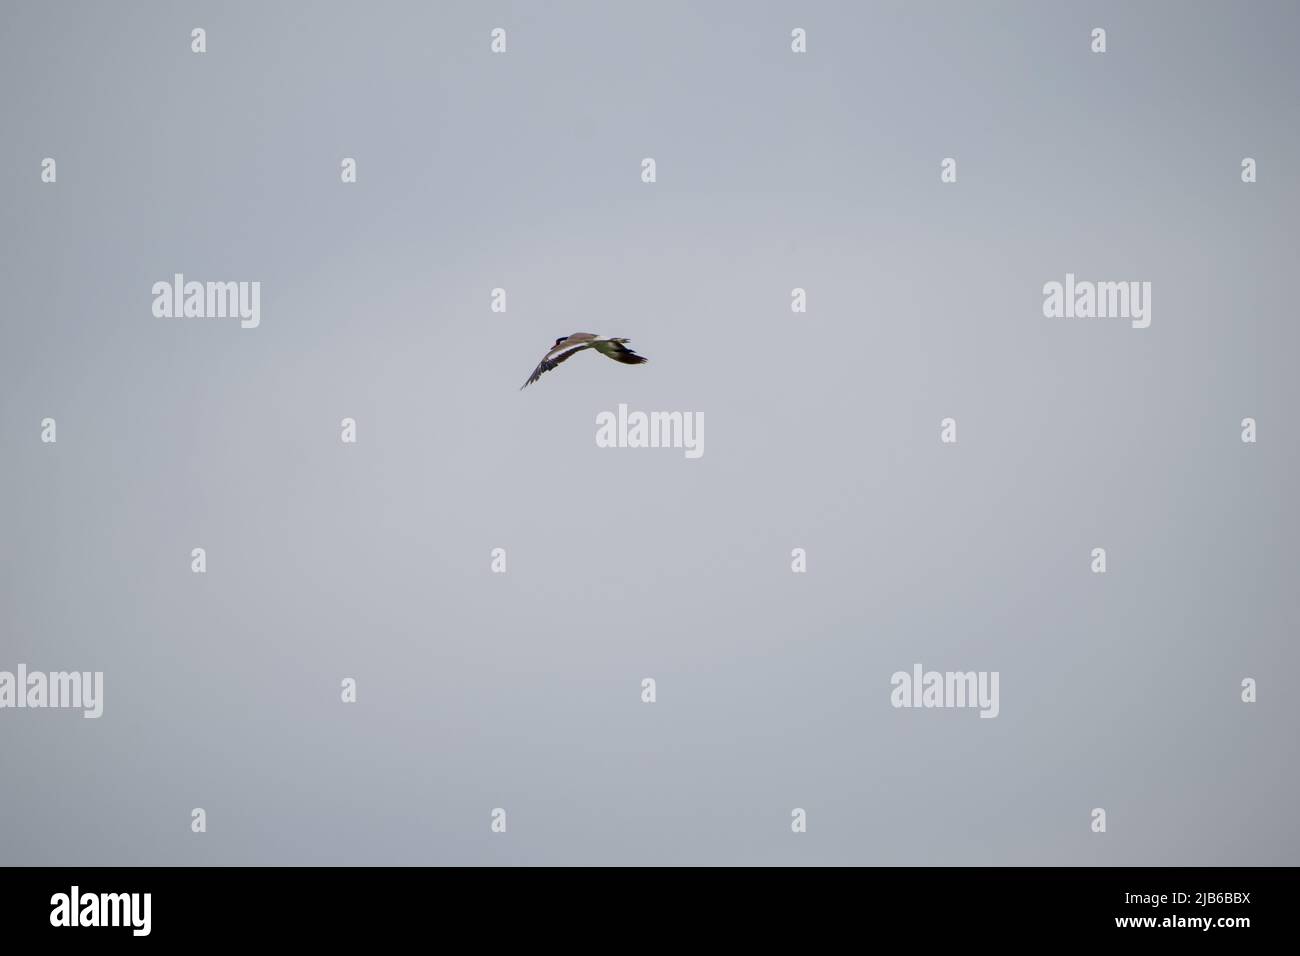 The view of birds In flight Stock Photo